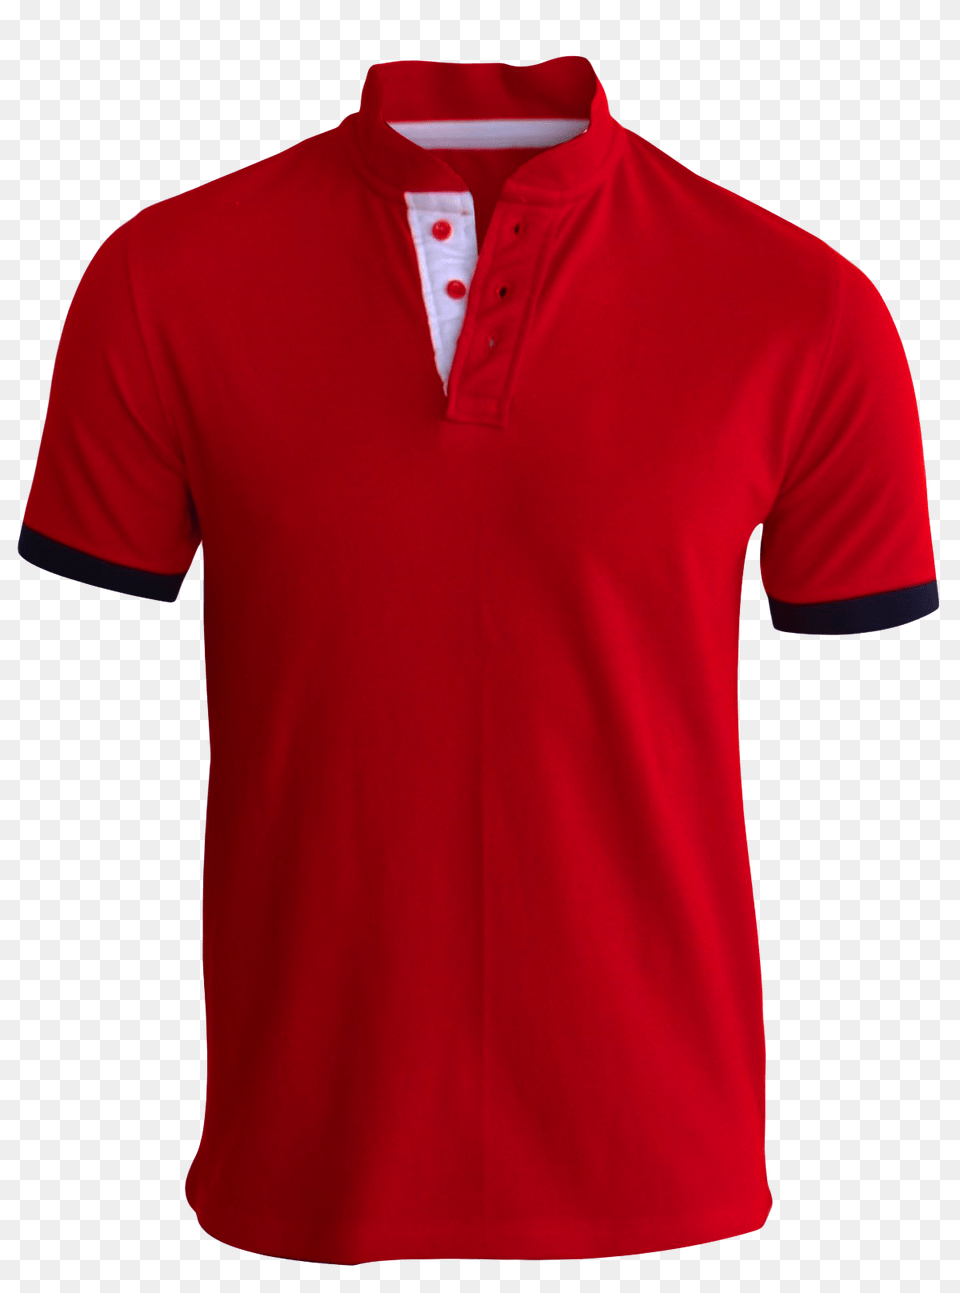 Red T Shirt Image, Clothing, T-shirt, Blouse, Jersey Png